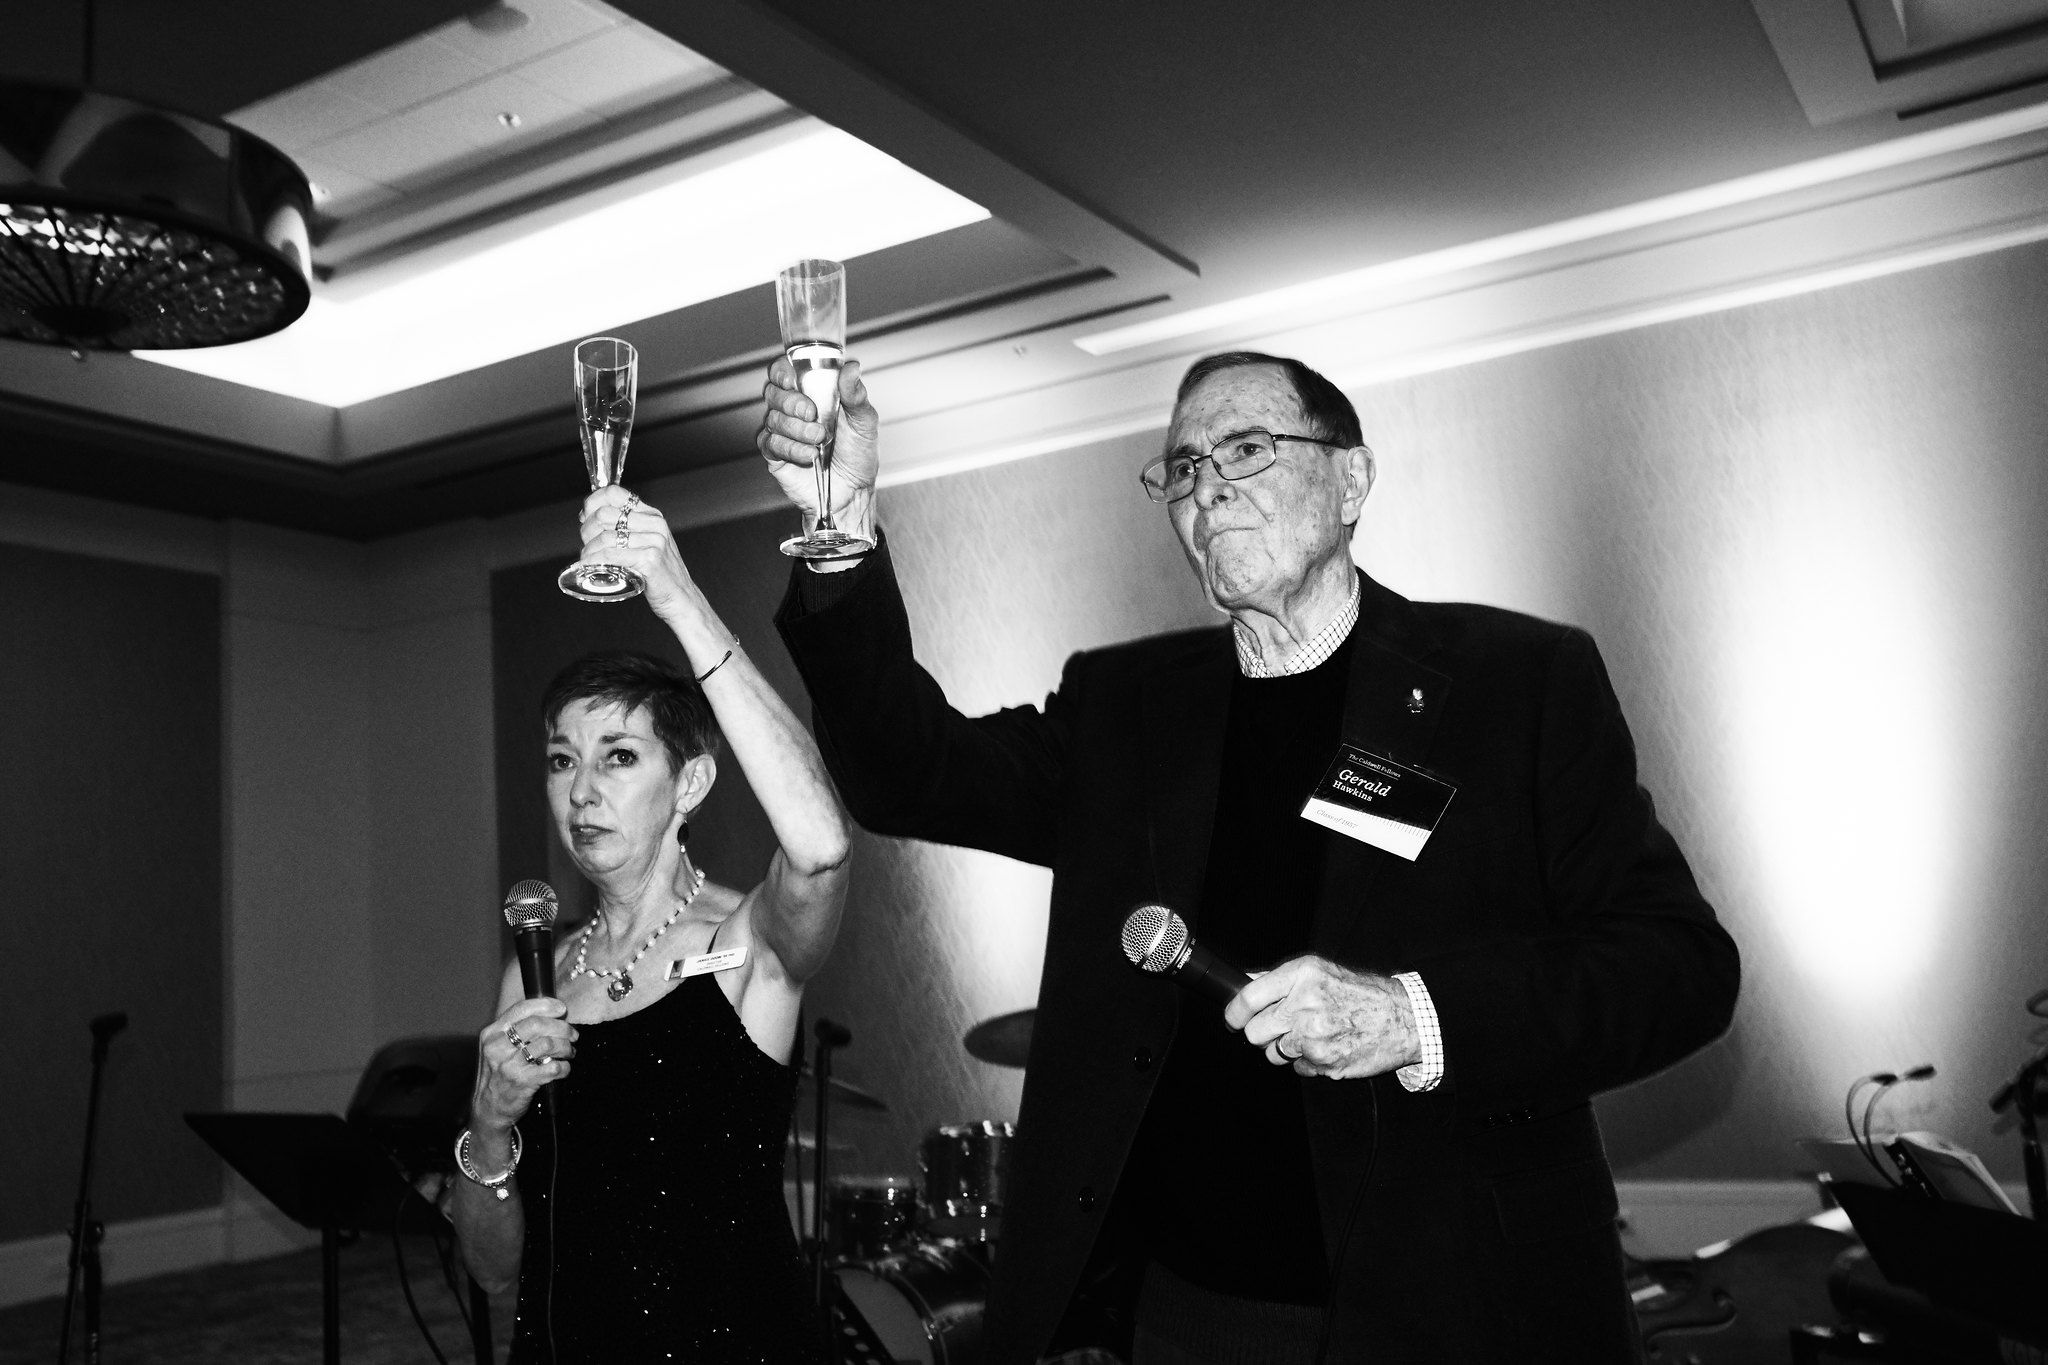 Dr. Janice Odom and Dr. Gerald Hawkins toast at the Caldwell Fellows program 50th anniversary celebration.